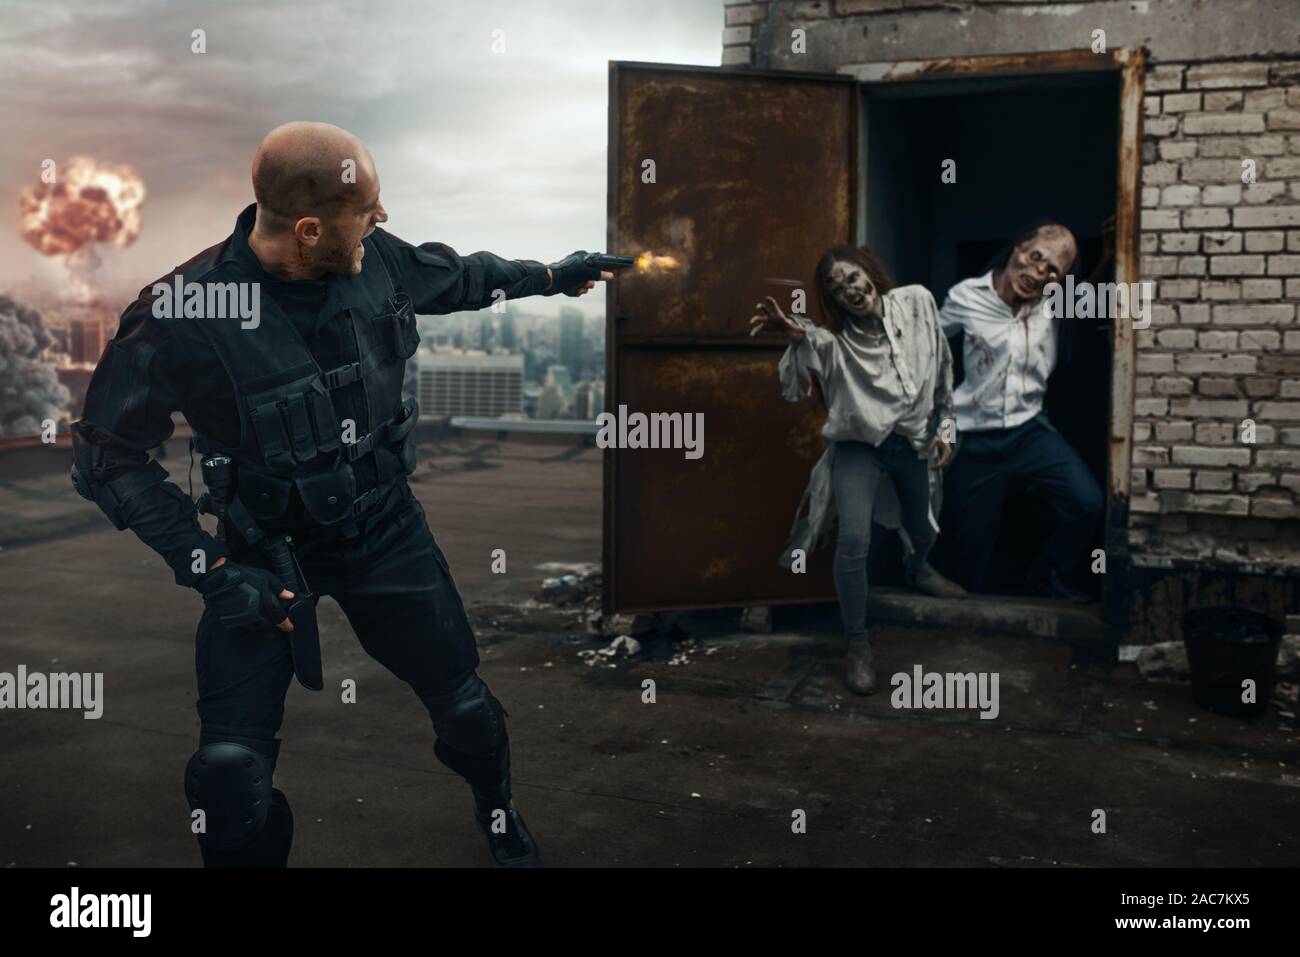 Military man with gun shoots zombies, deadly chase Stock Photo